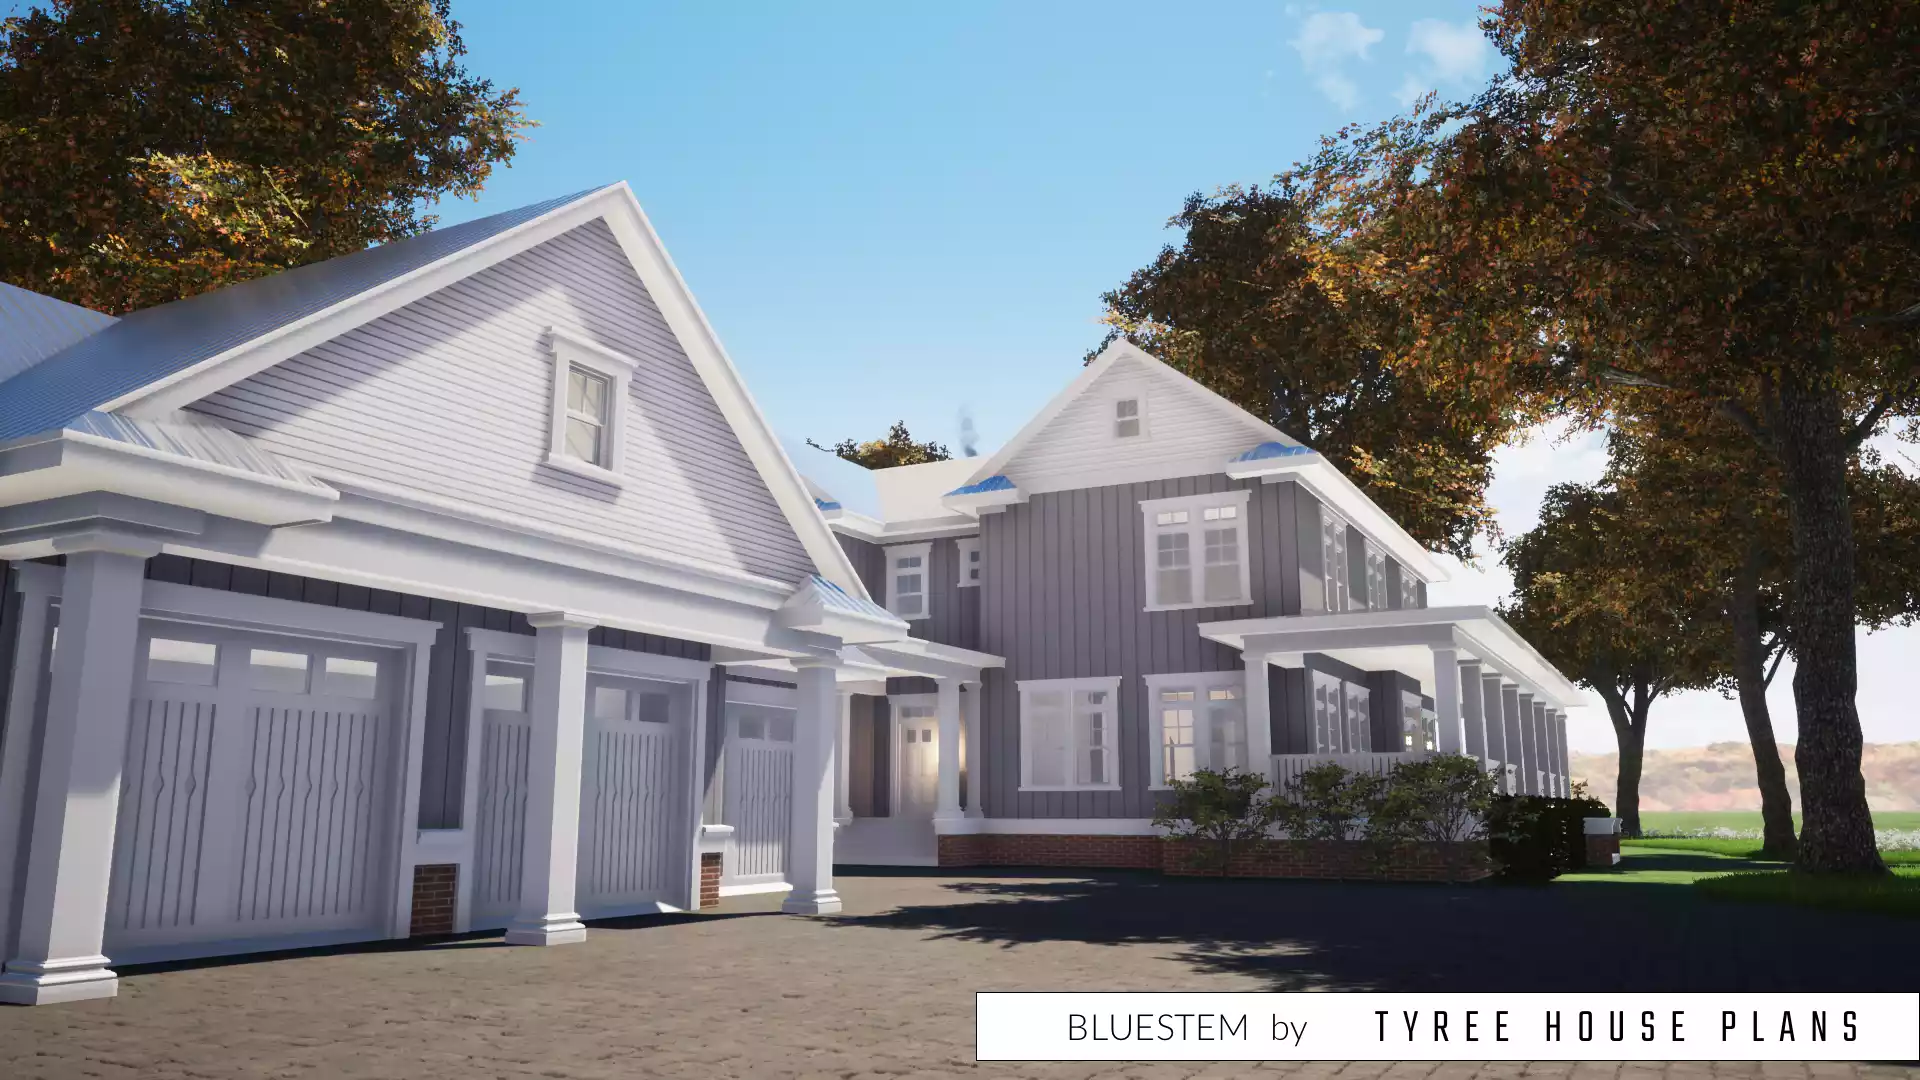 Garage with house beyond. Bluestem by Tyree House Plans.